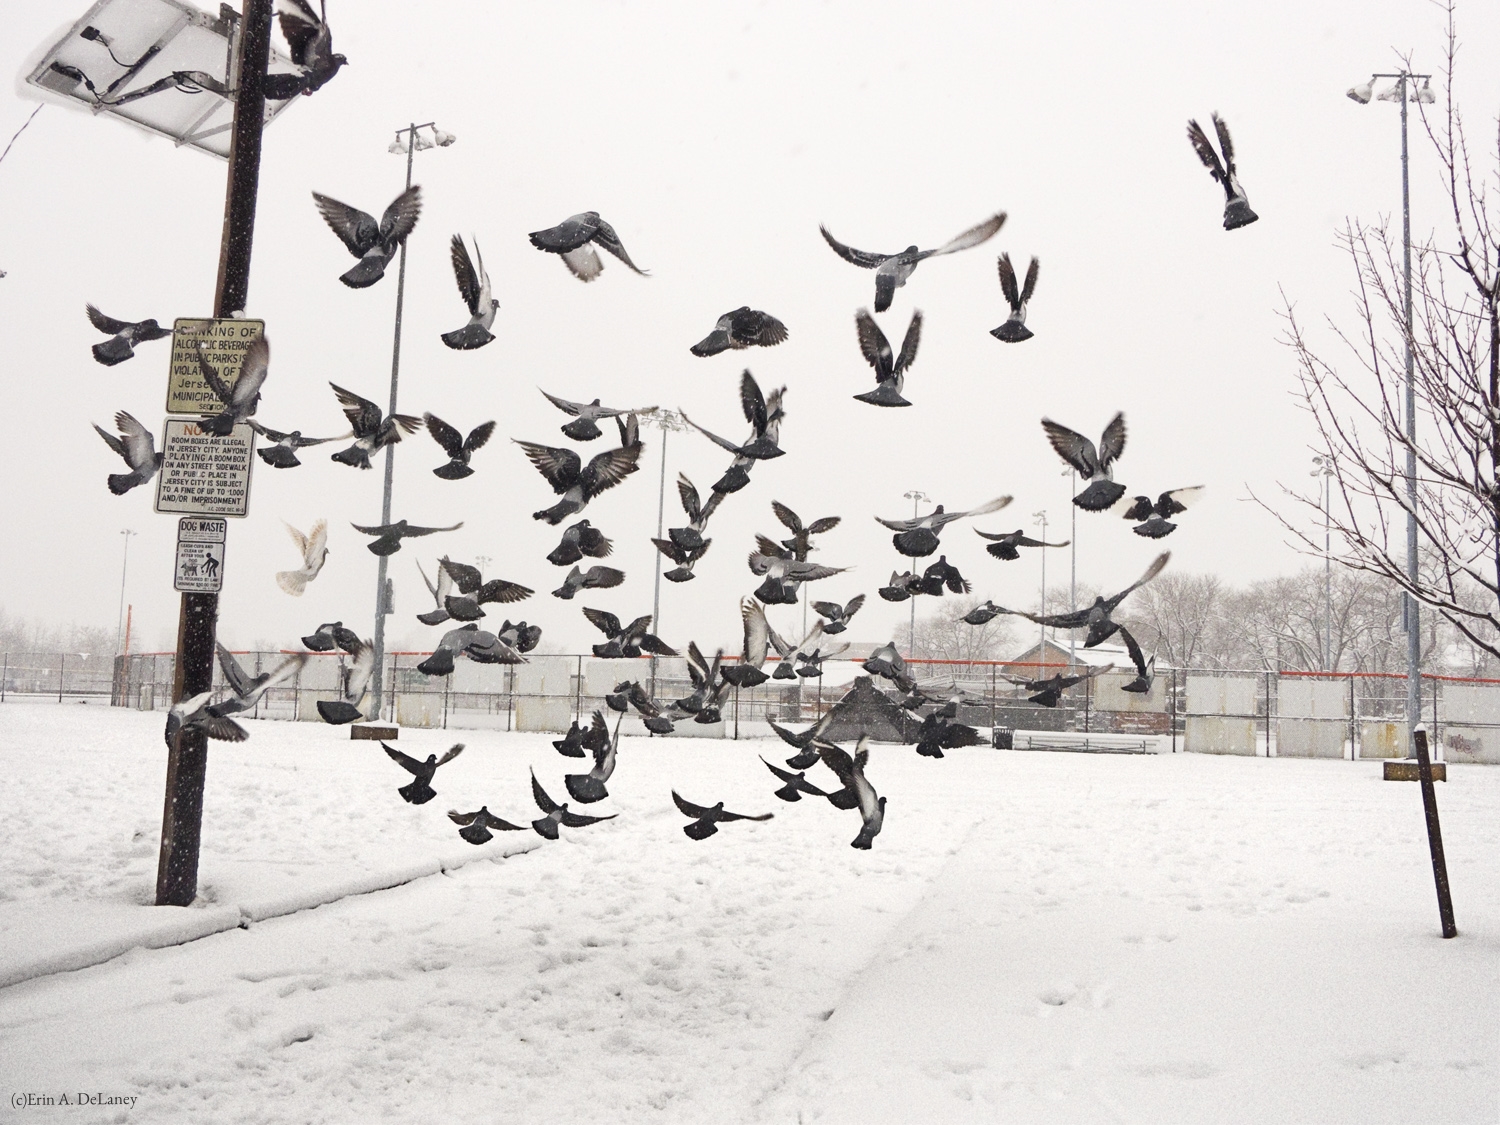 Pigeons in Flight on a Winter Day, 2013